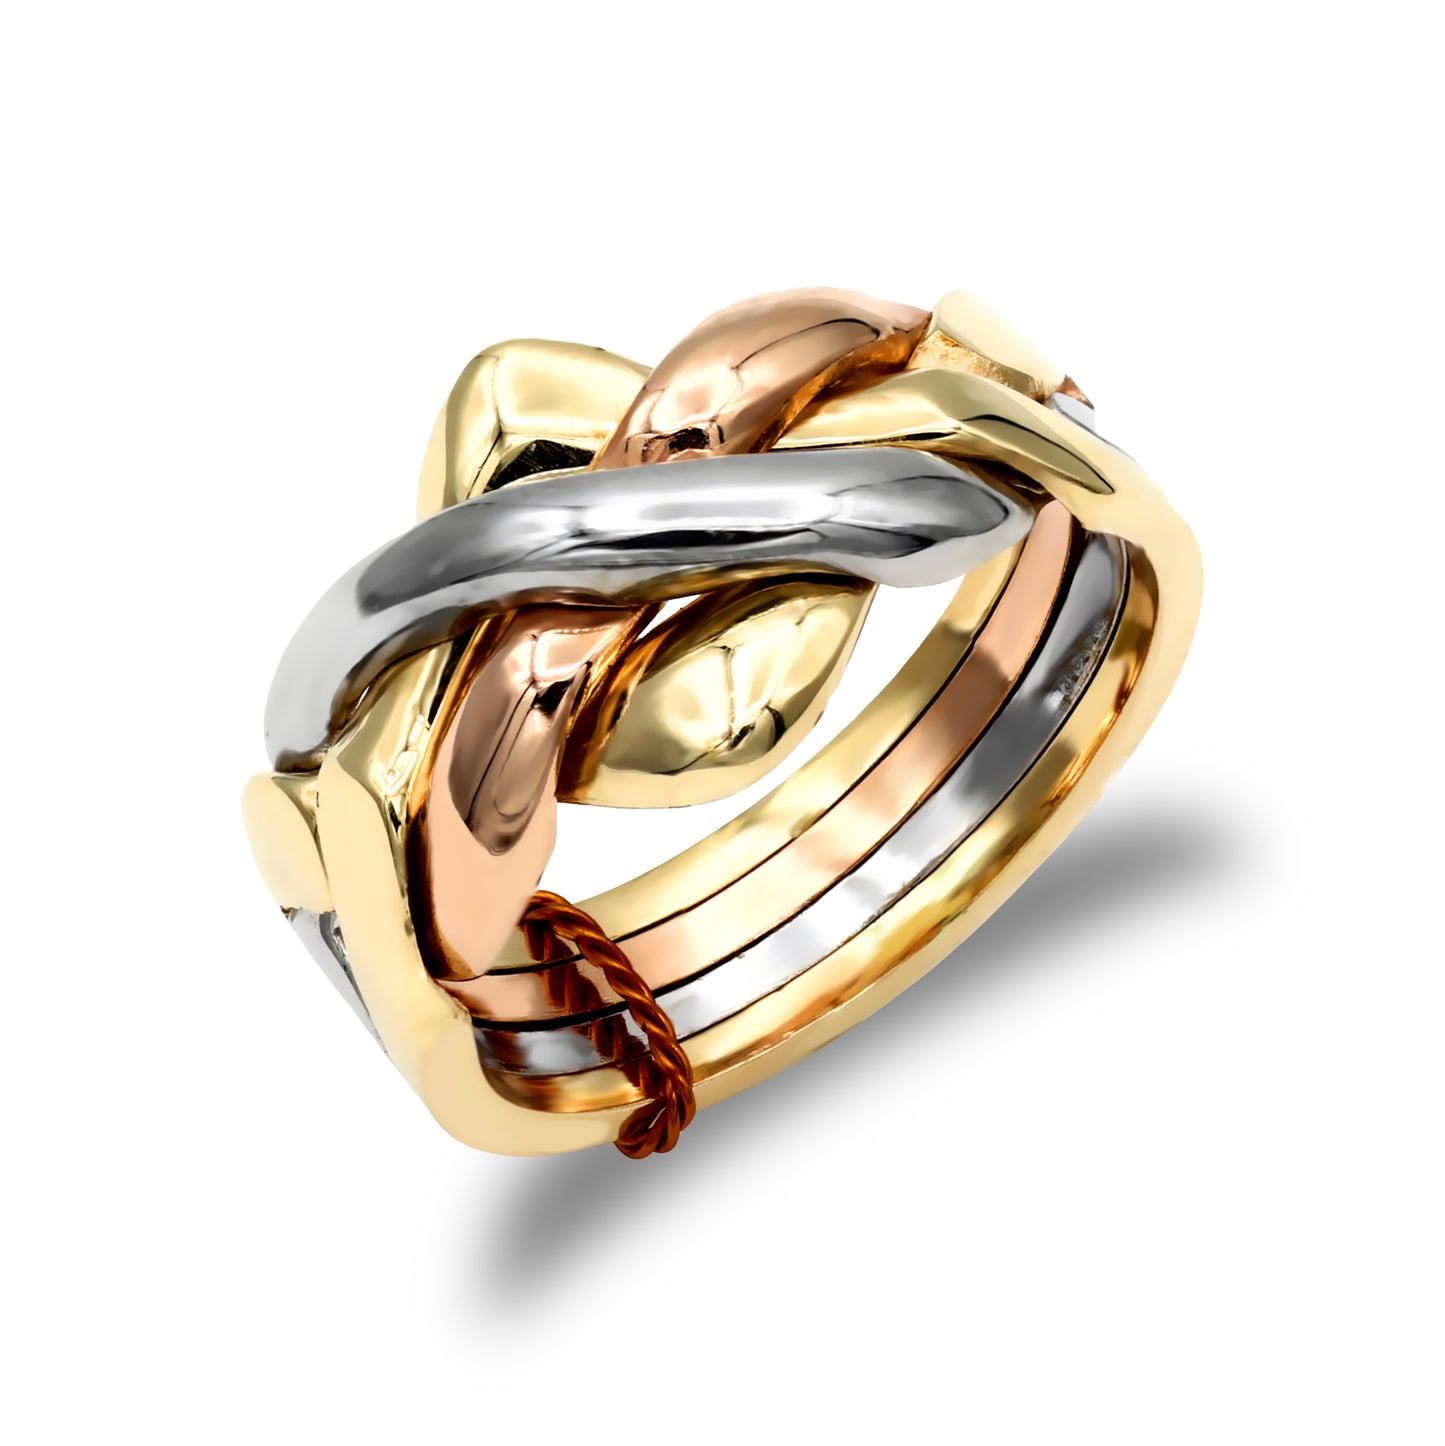 Unisex Solid 9ct Yellow White and Rose Gold  4 Piece Puzzle Ring - JRN159